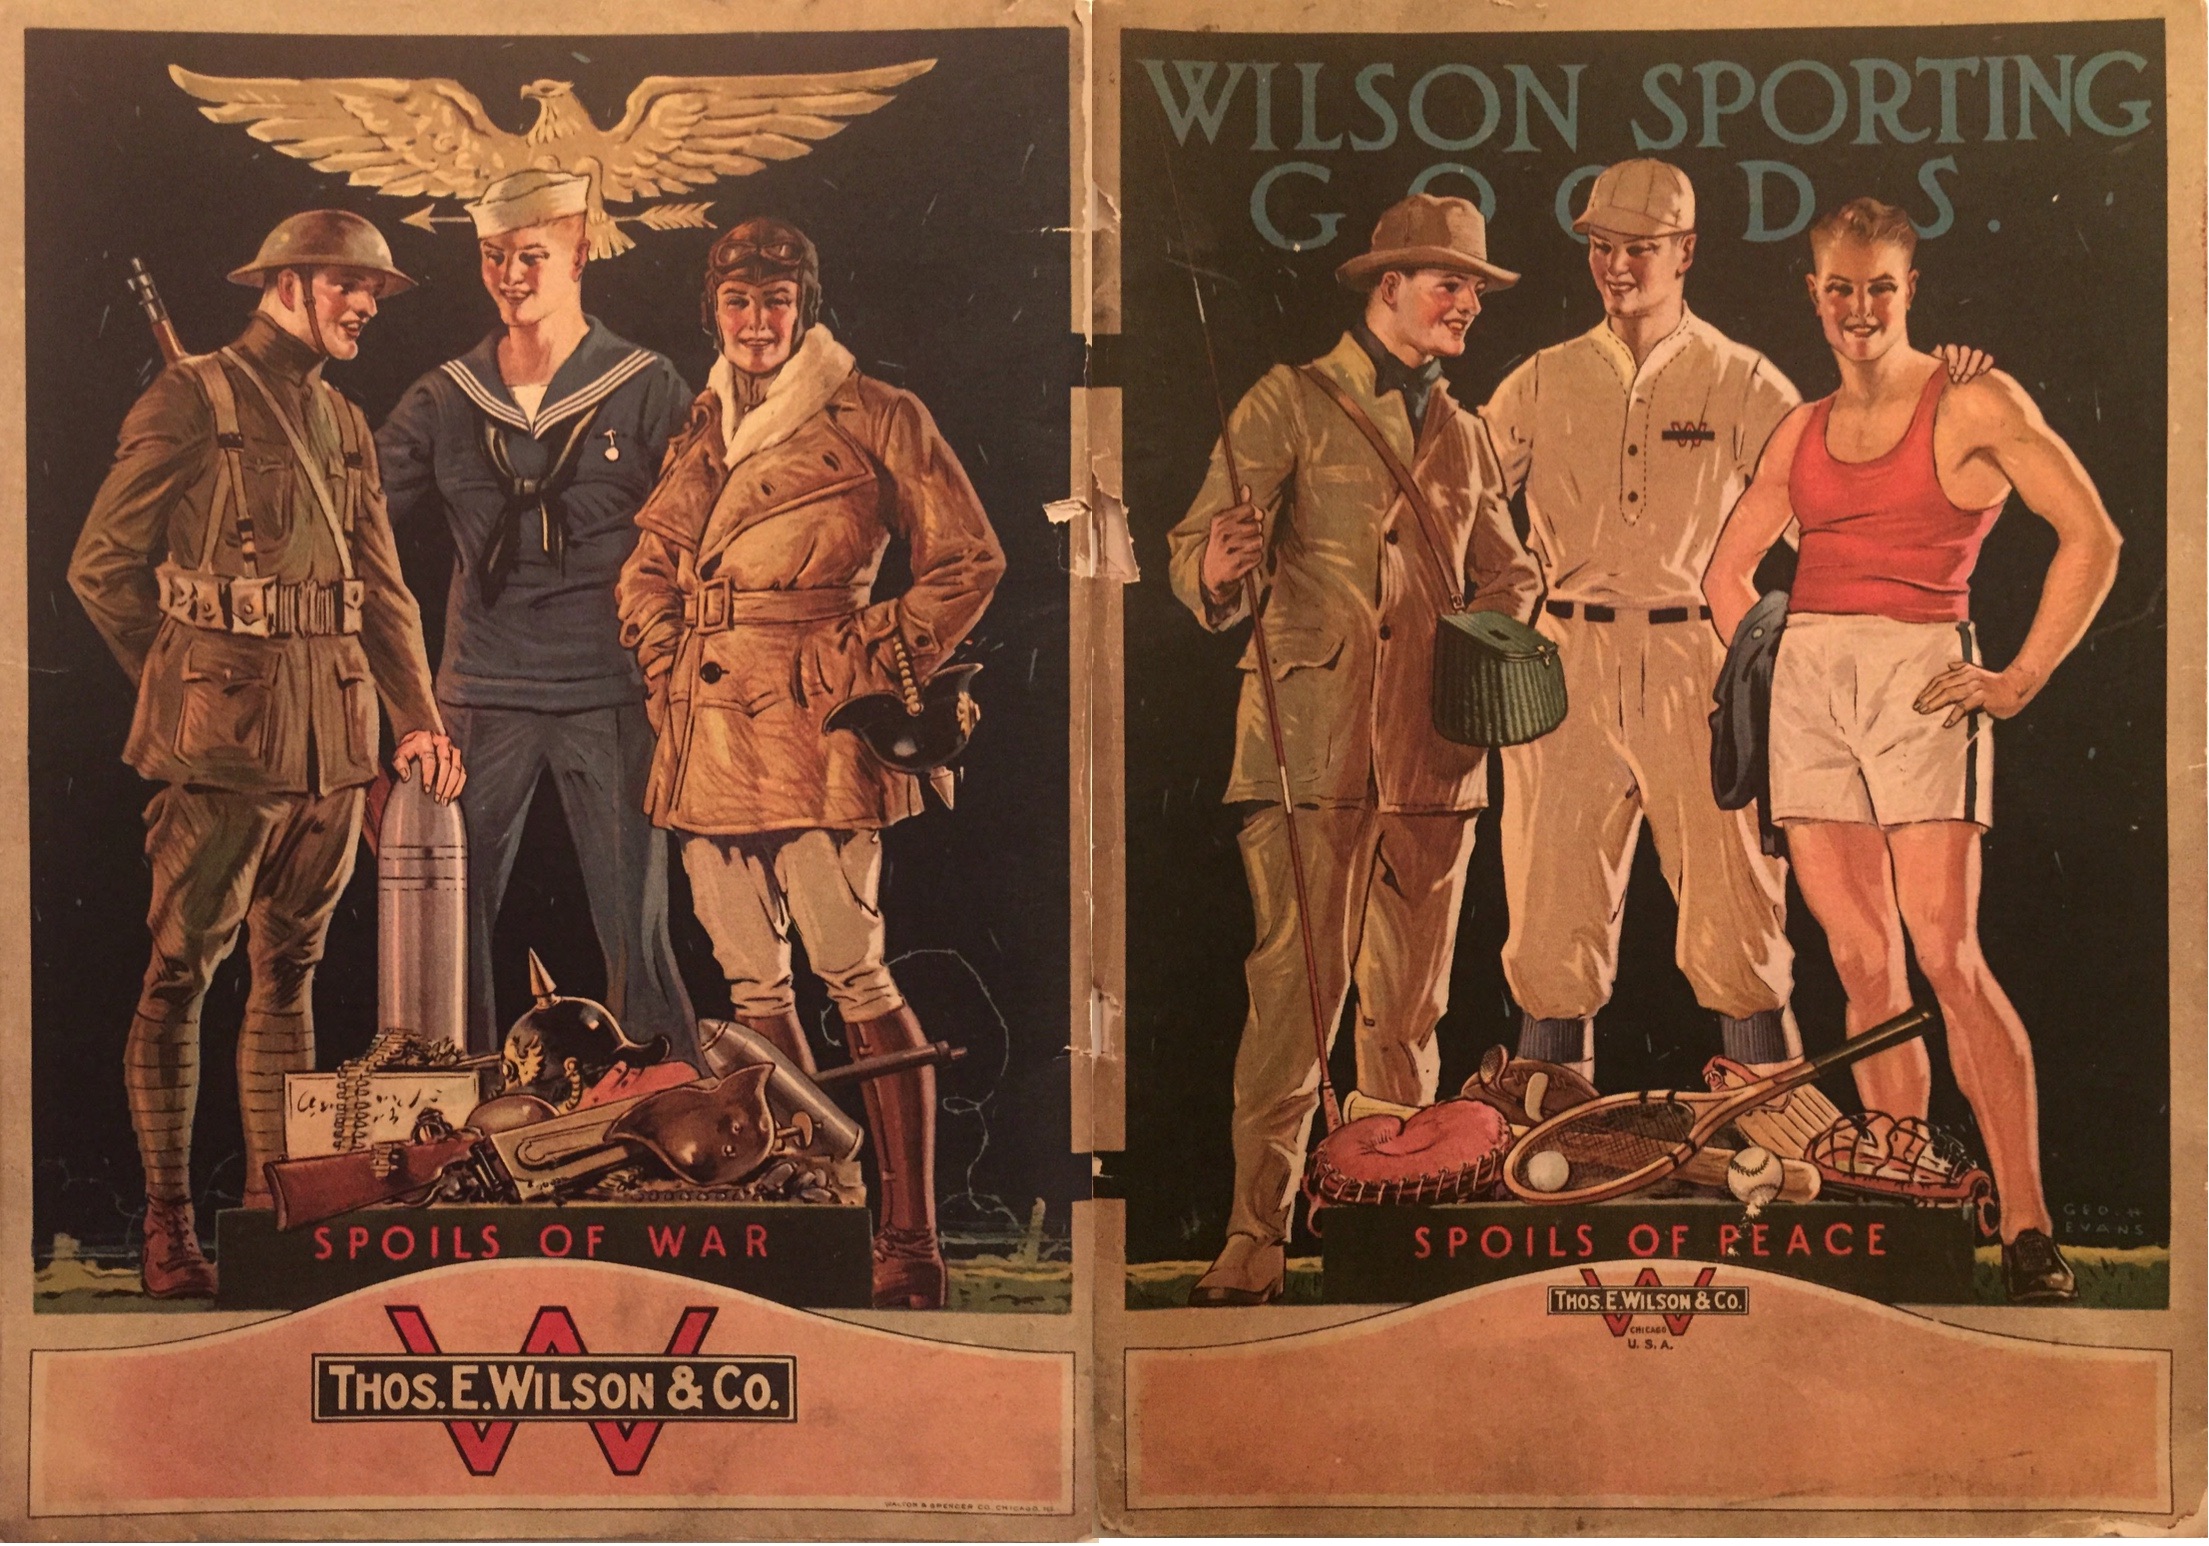 Thos. E. Wilson & Co. / Wilson Sporting Goods, est. 1913 - Made-in-Chicago  Museum